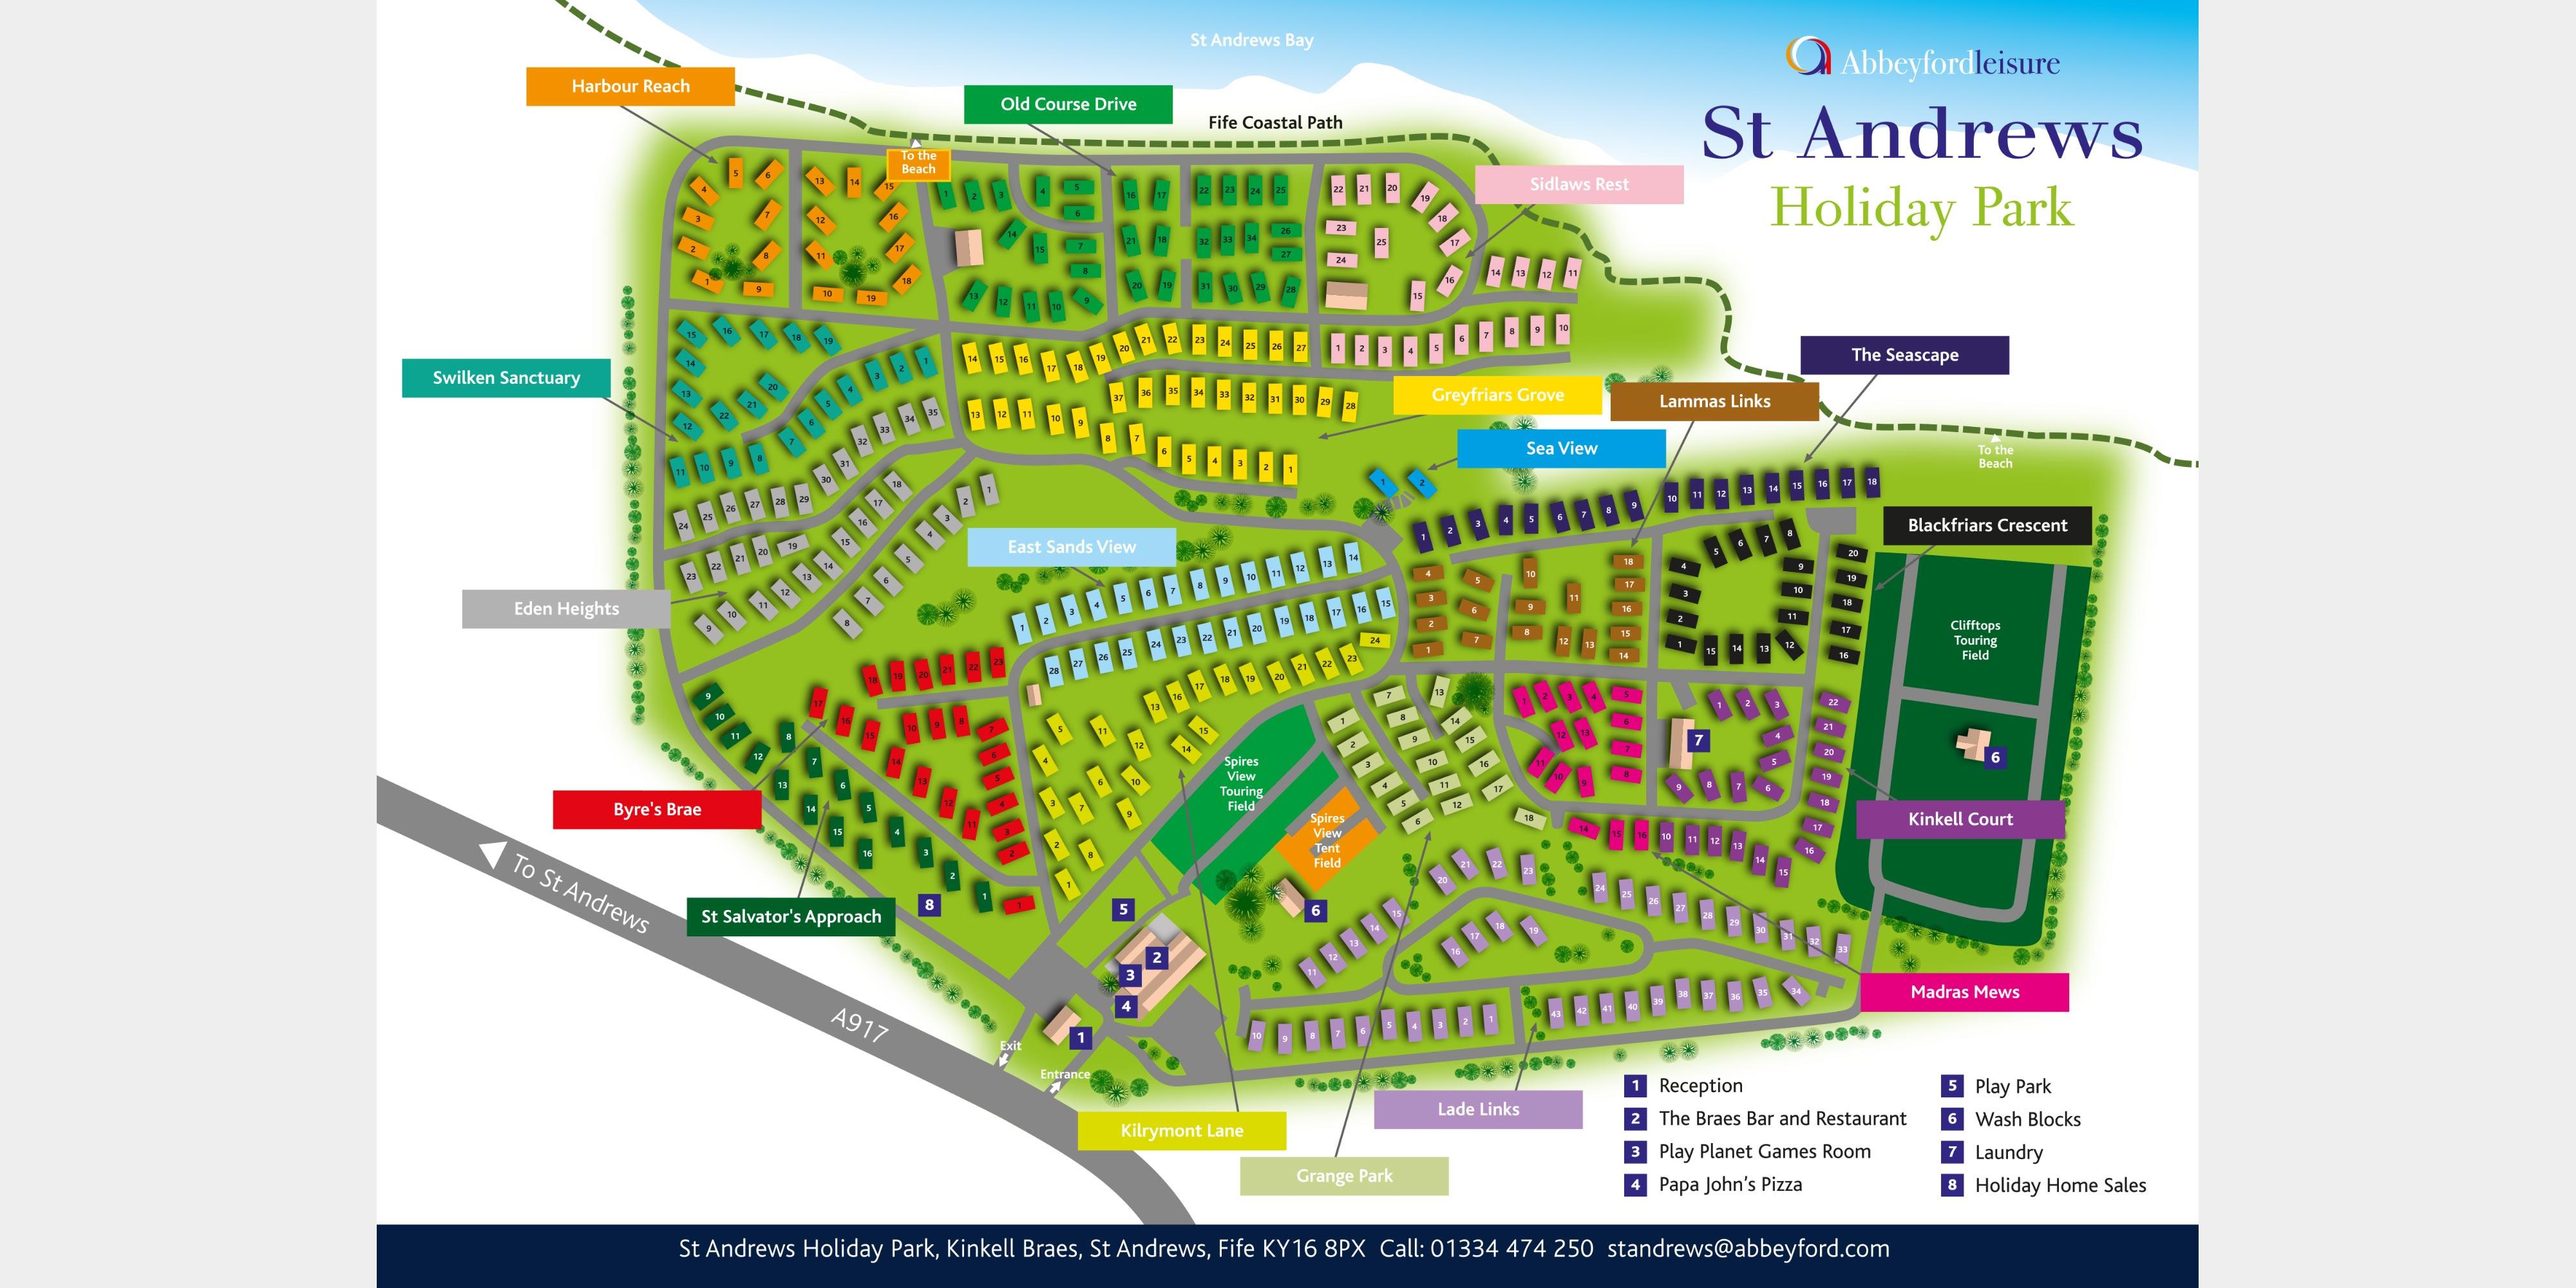 St Andrews Holiday Park - Main Map